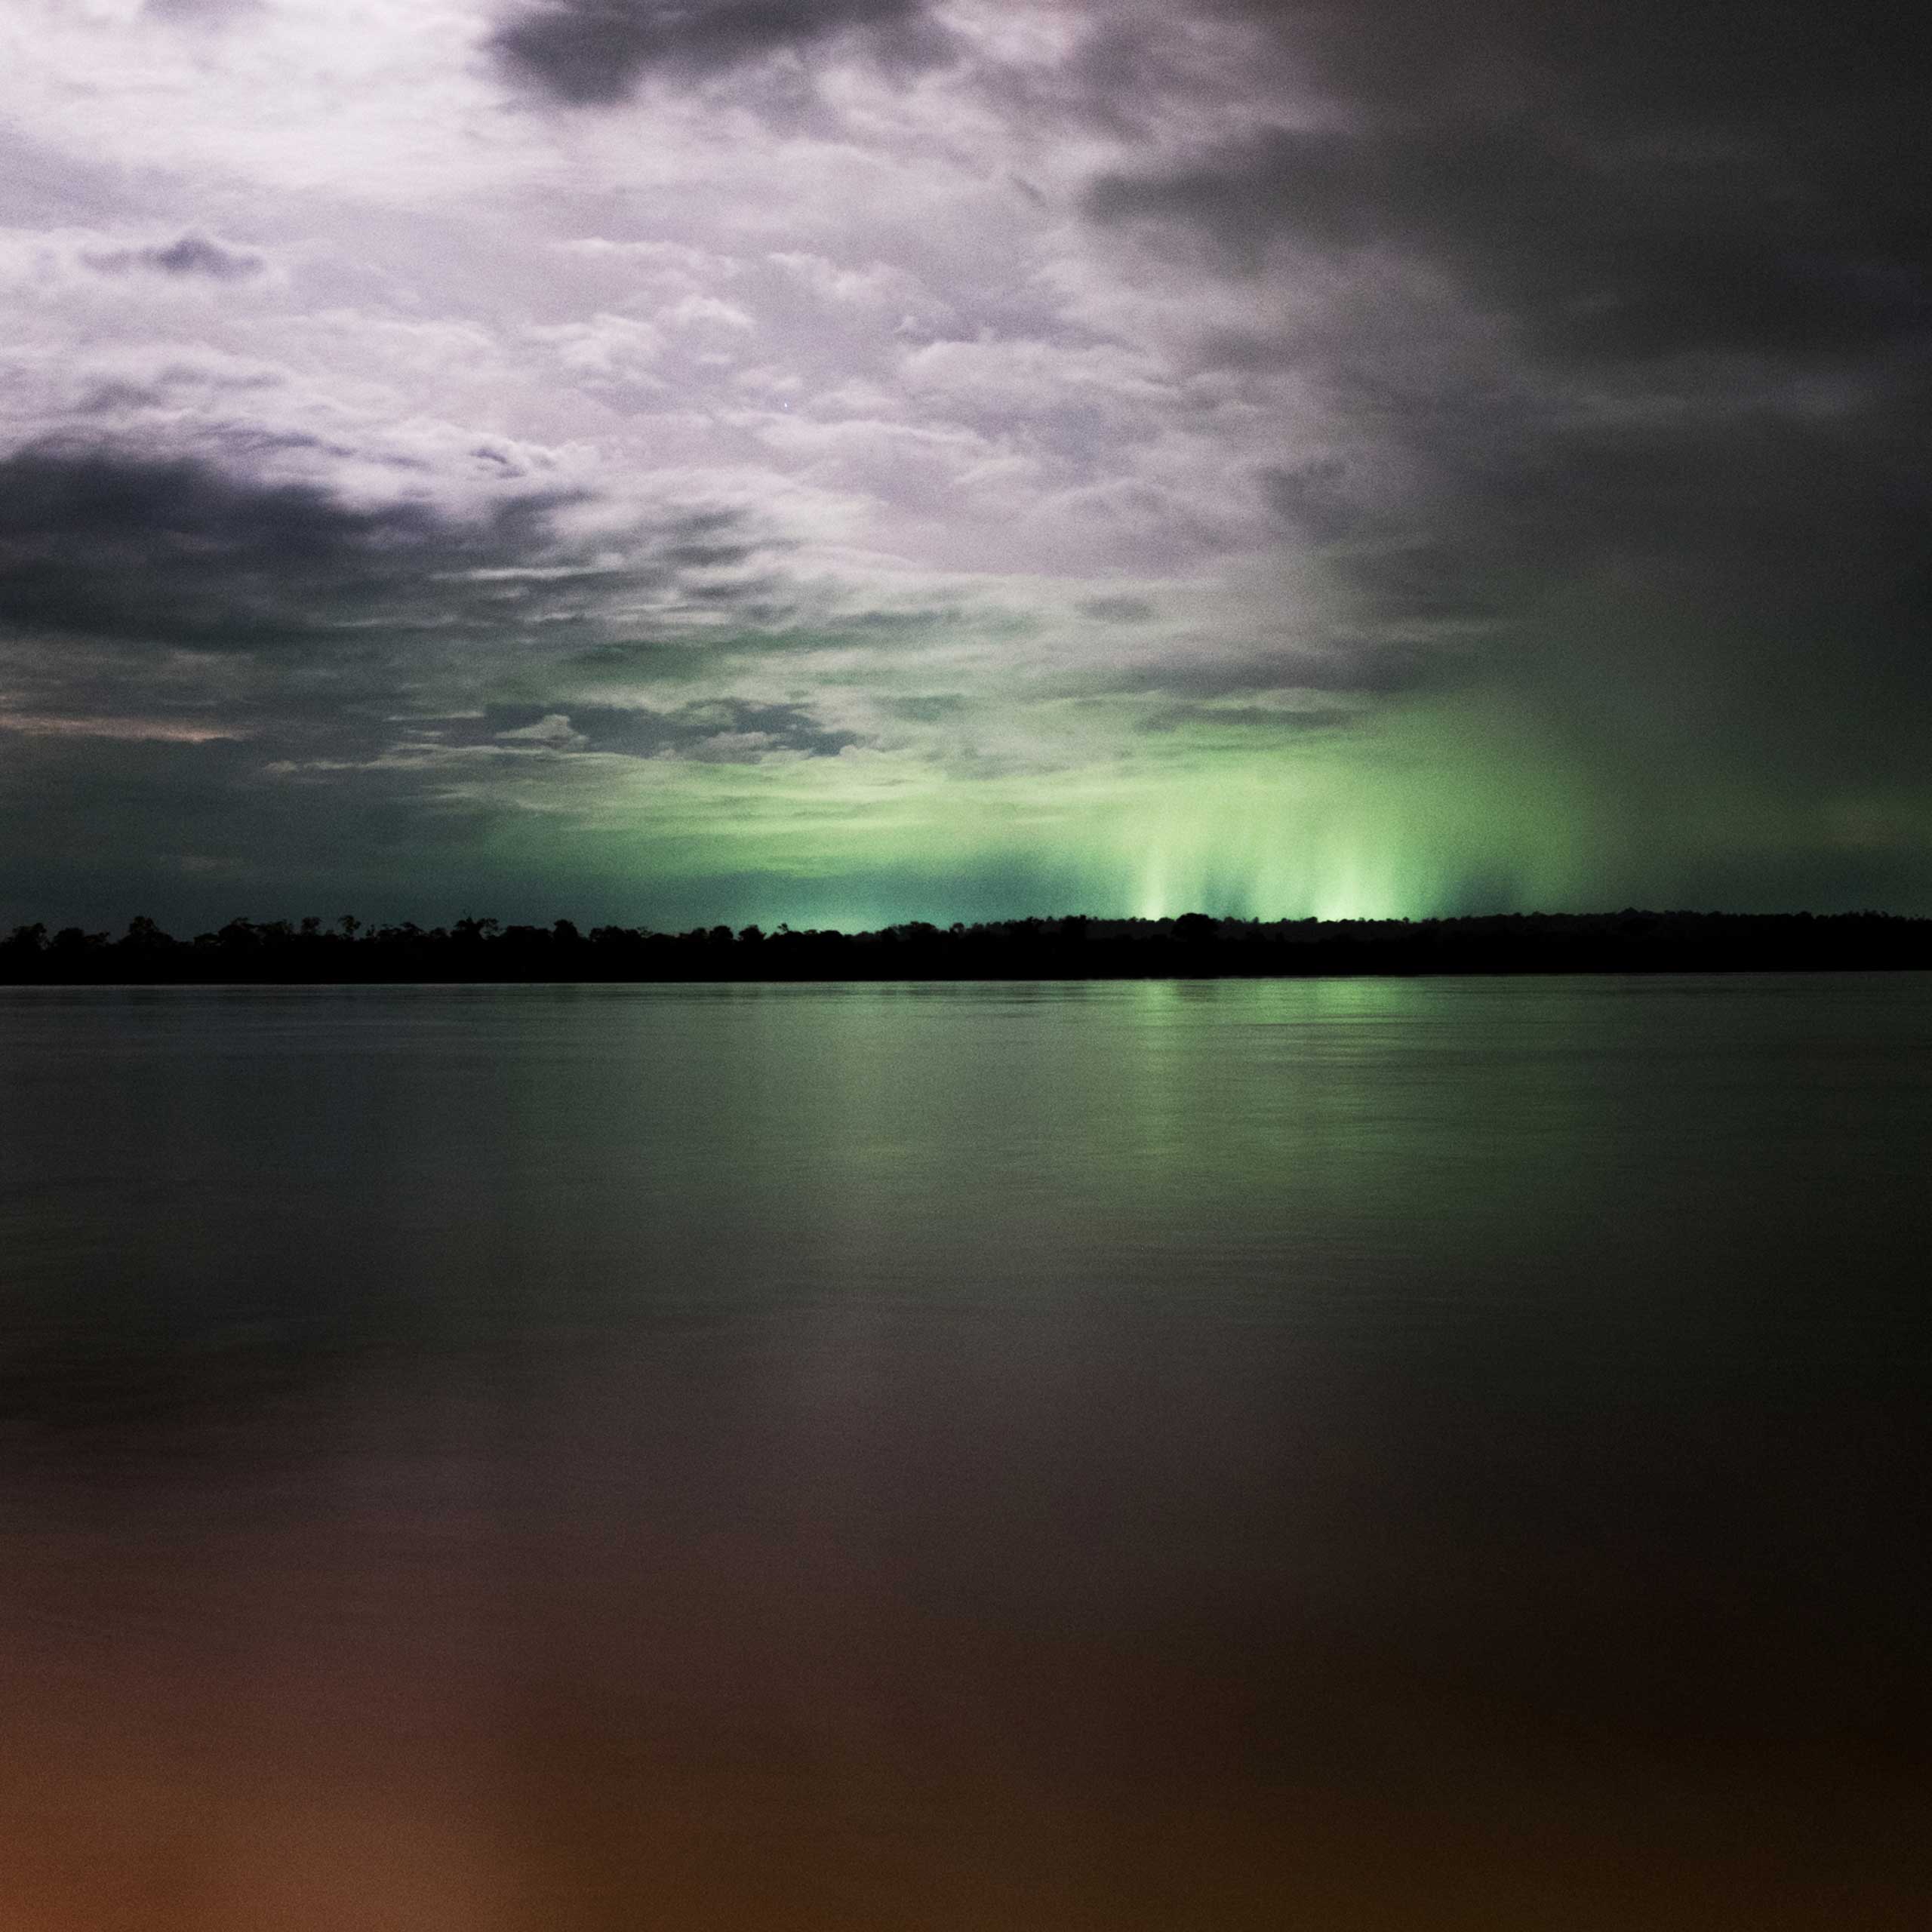 The construction site of the Belo Monte Dam lights up the sky over the Xingu River, seen from the nearby city of Altamira. Belo Monte is the largest industrial operation in South America and will be the third largest dam in the world, Feb. 2014.